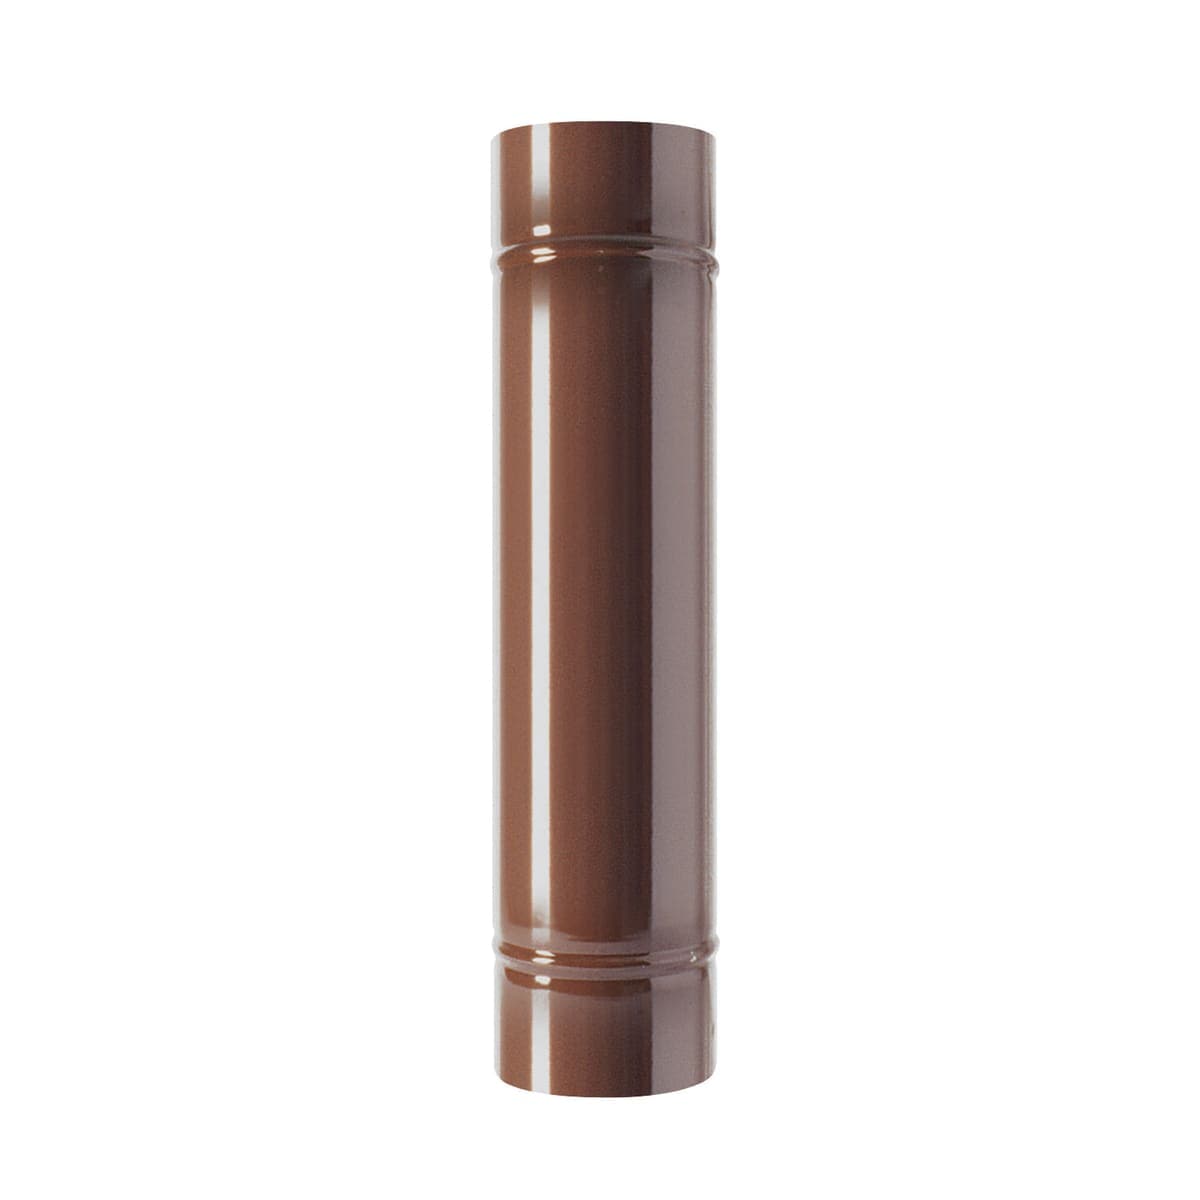 WOOD TUBE 0.5 MM THICK L500 DIA130 MM ENAMELLED BROWN - best price from Maltashopper.com BR430006133